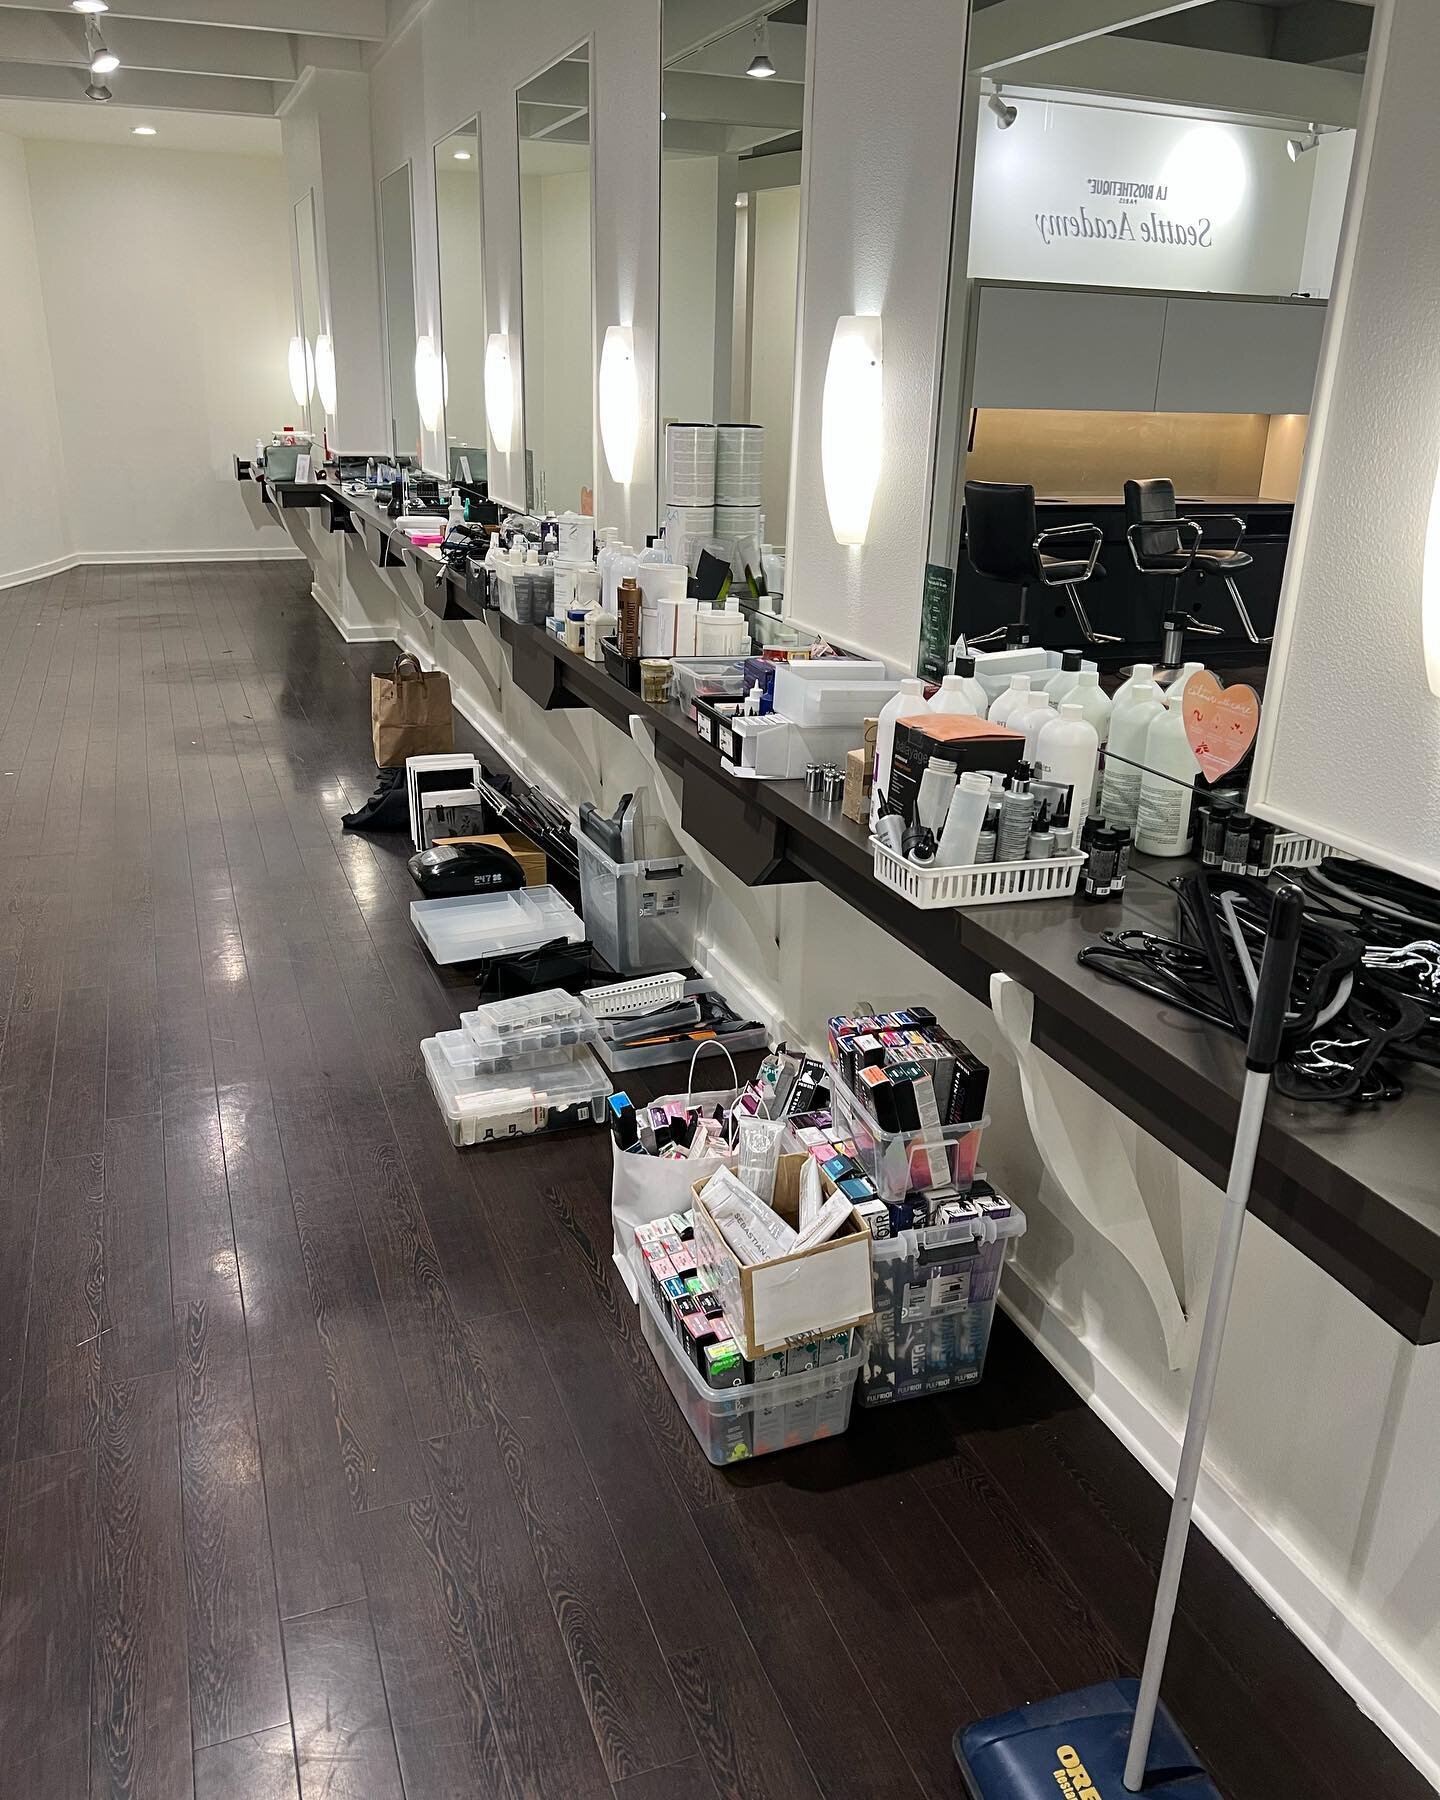 We are moving and downsizing our operations.  Everything is for sale, come and make an offer.  Salon, office, storage  and cleaning products. 

Contact Rory to schedule a visit before Sept 11.